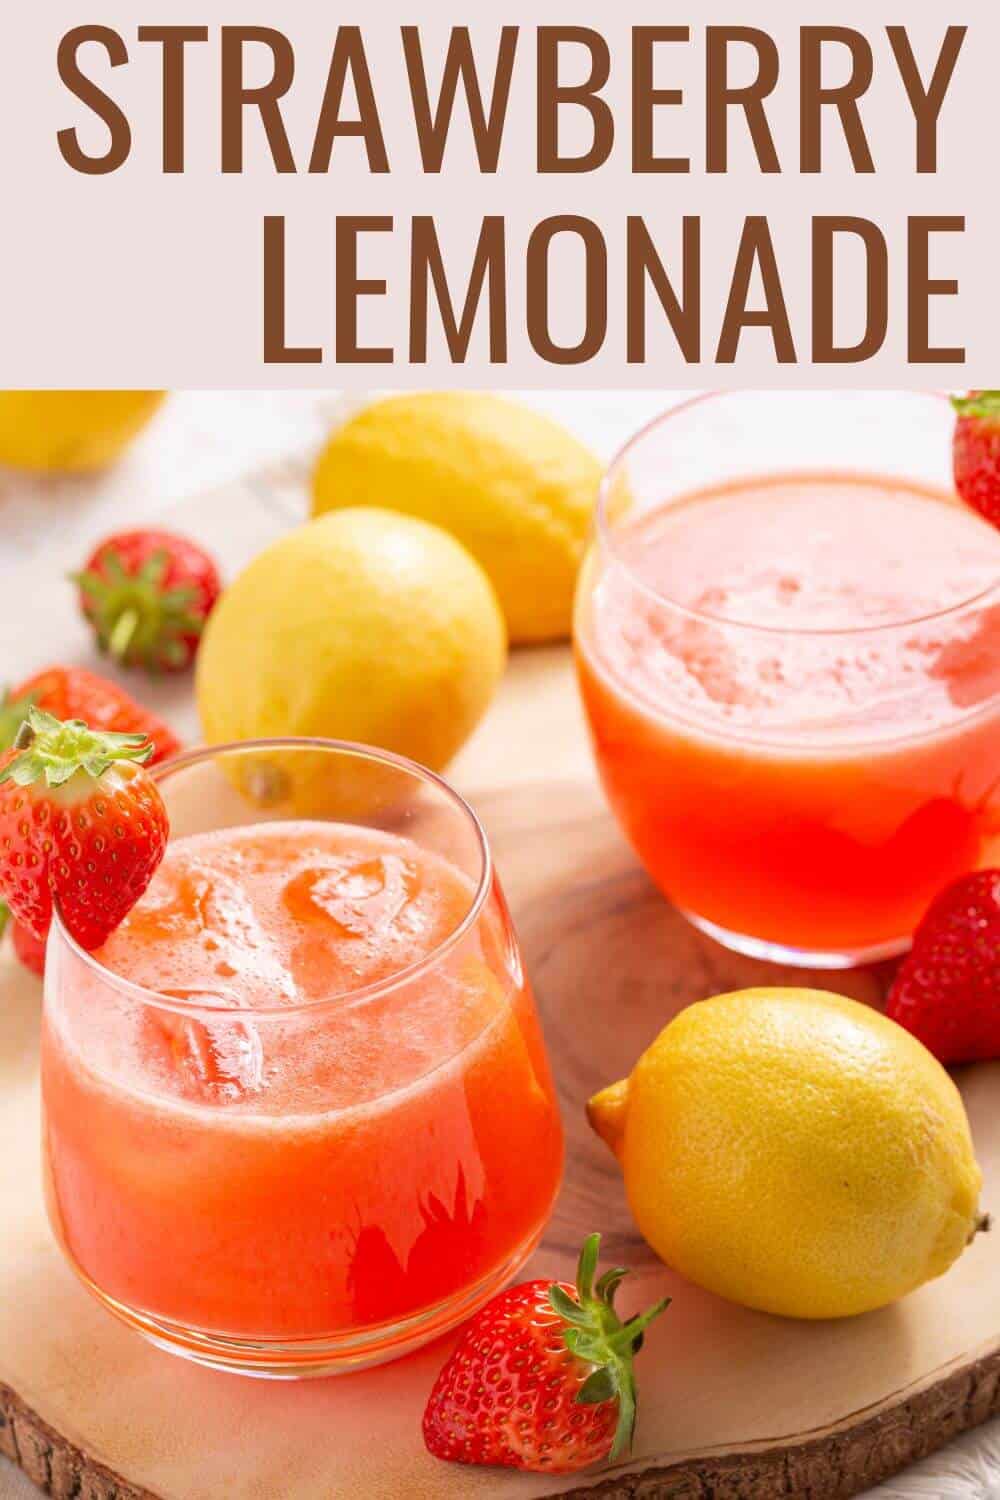 Strawberry lemonade with title text overlay.